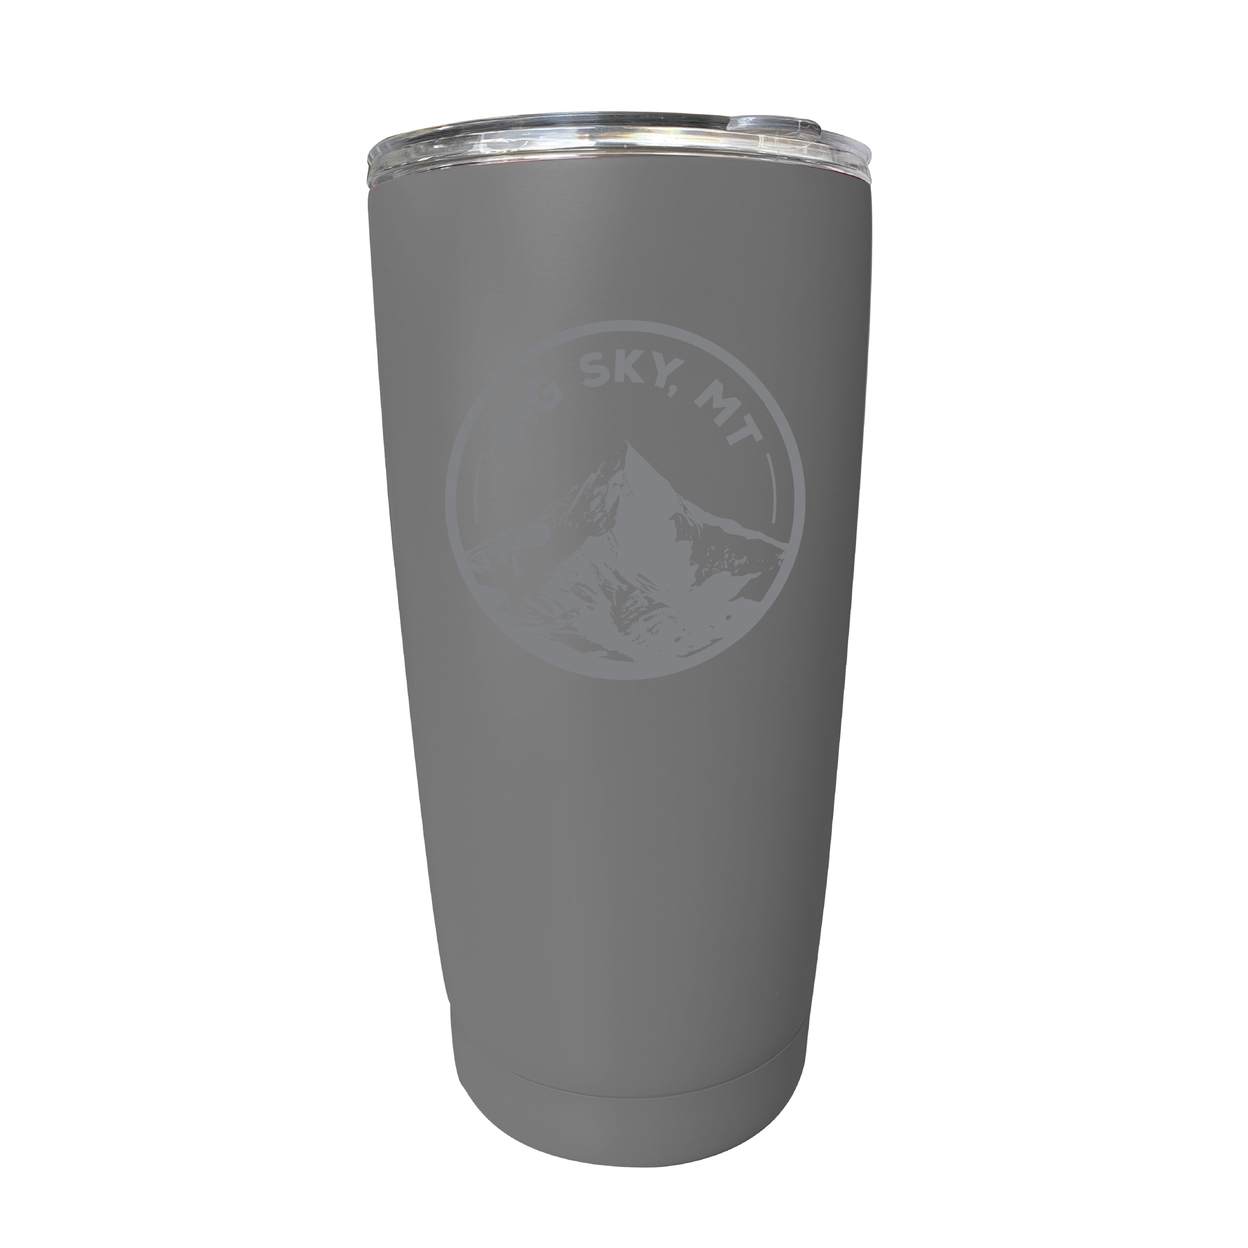 Big Sky Montana Souvenir 16 Oz Engraved Stainless Steel Insulated Tumbler - Gray,,2-Pack